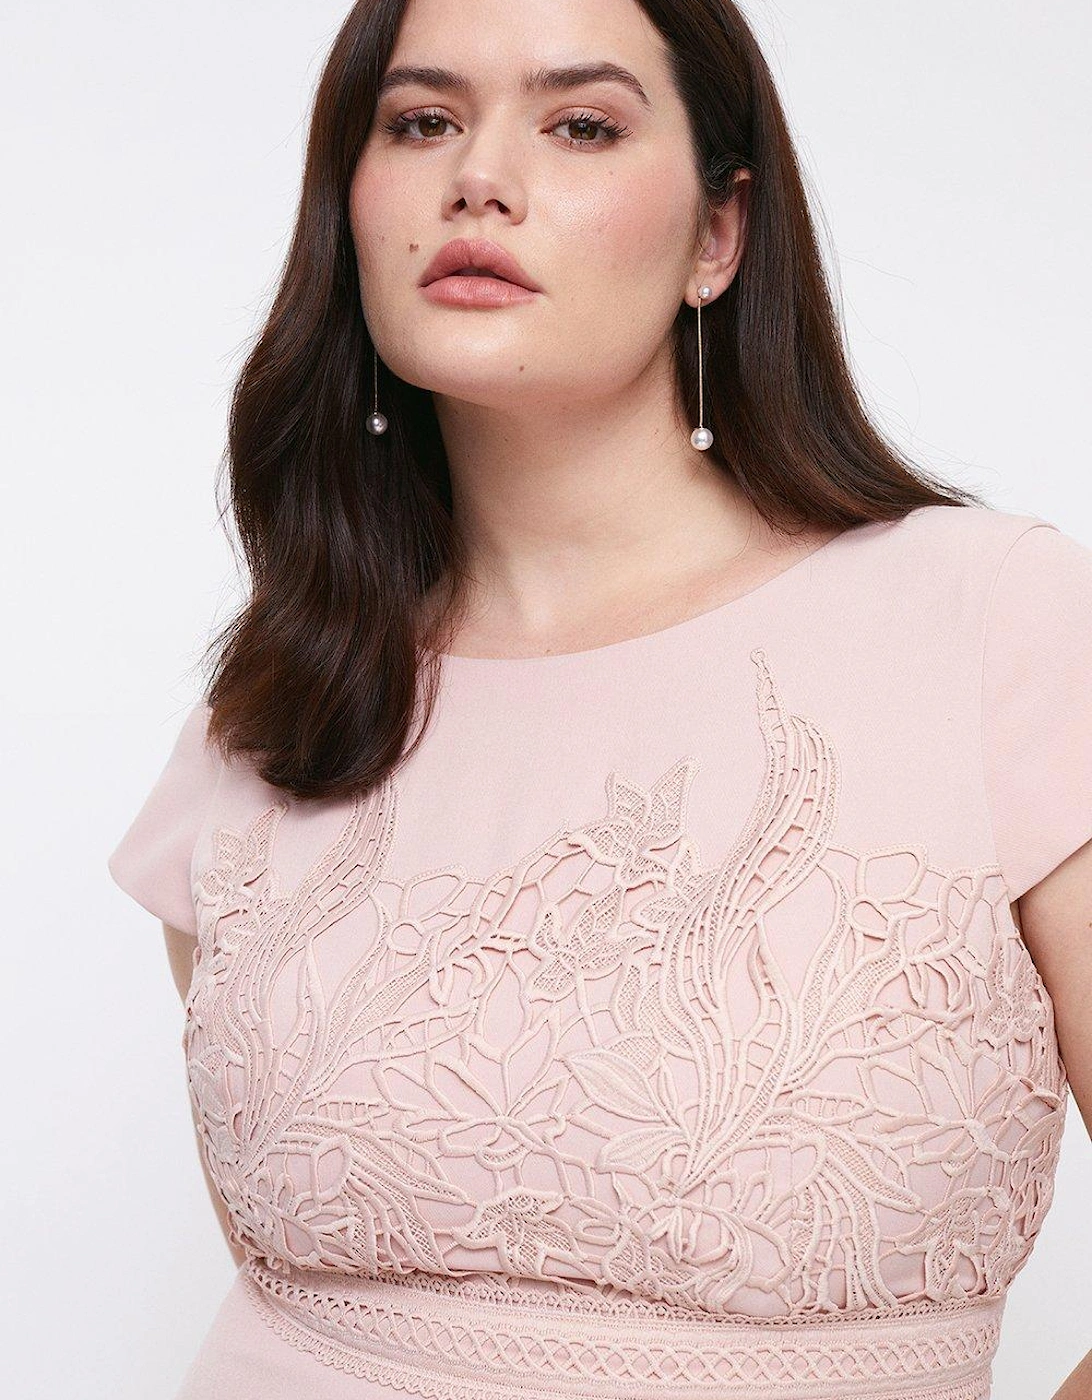 Plus Size Lace Dress With Circular Skirt